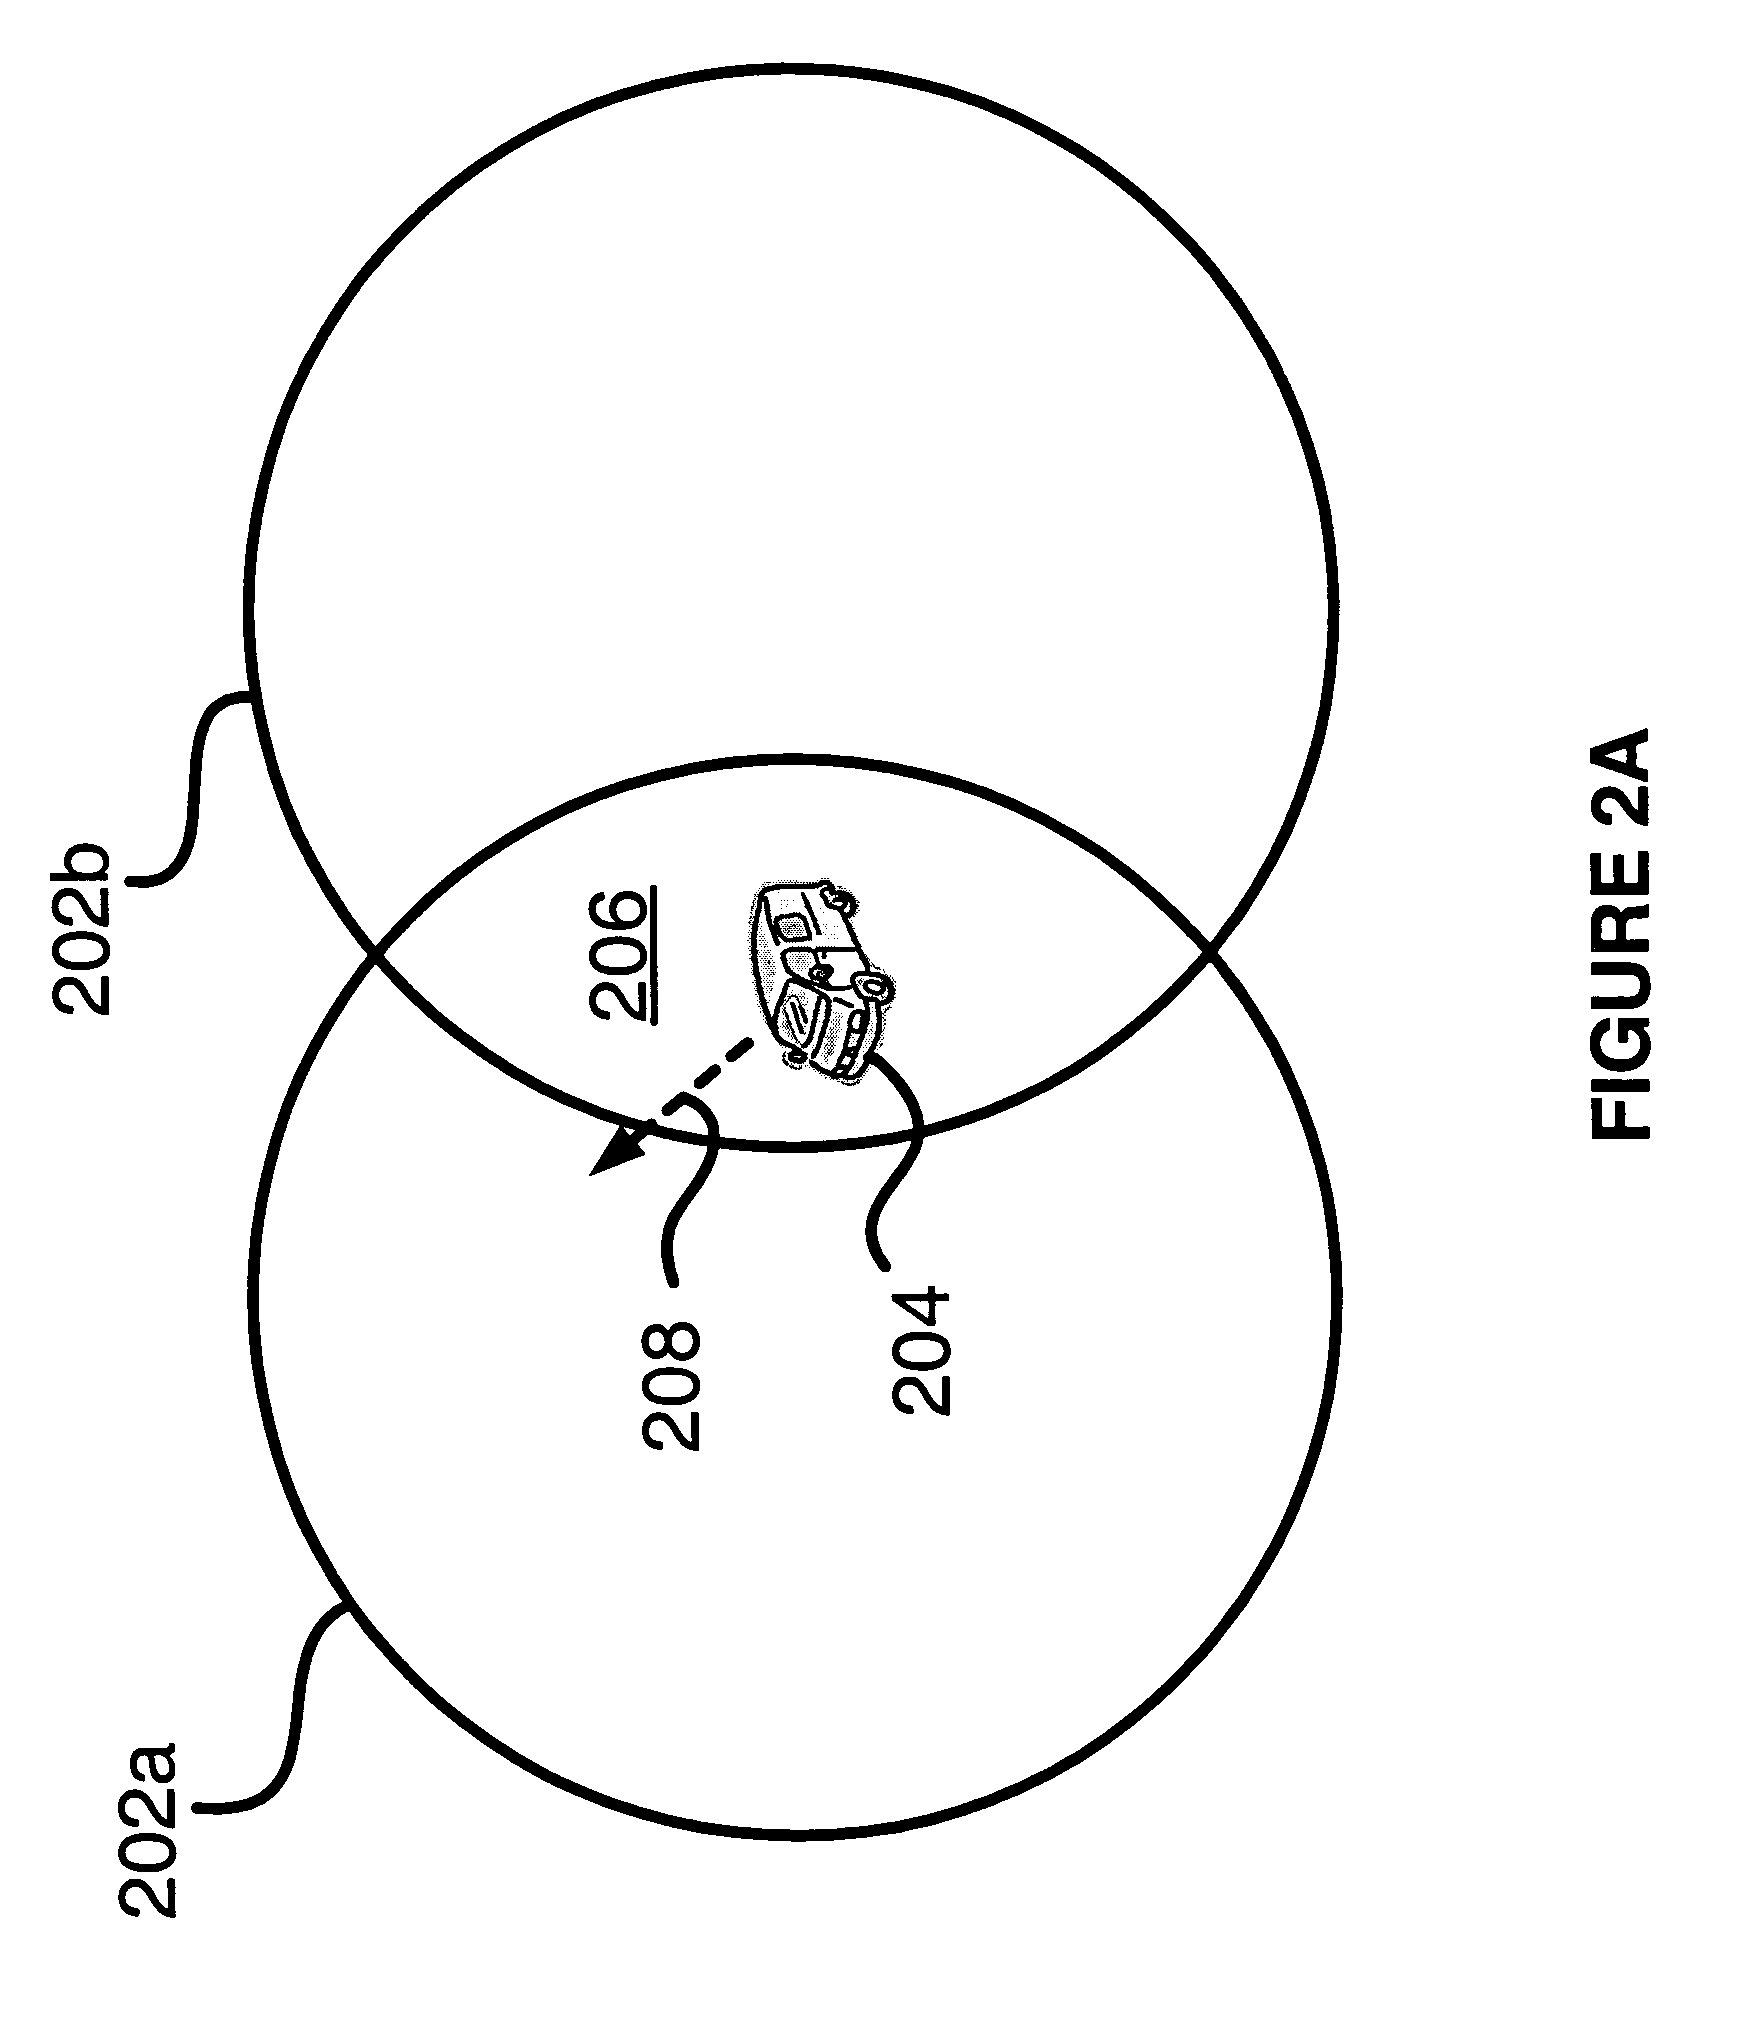 System of and method for using position, velocity, or direction of motion estimates to support handover decisions